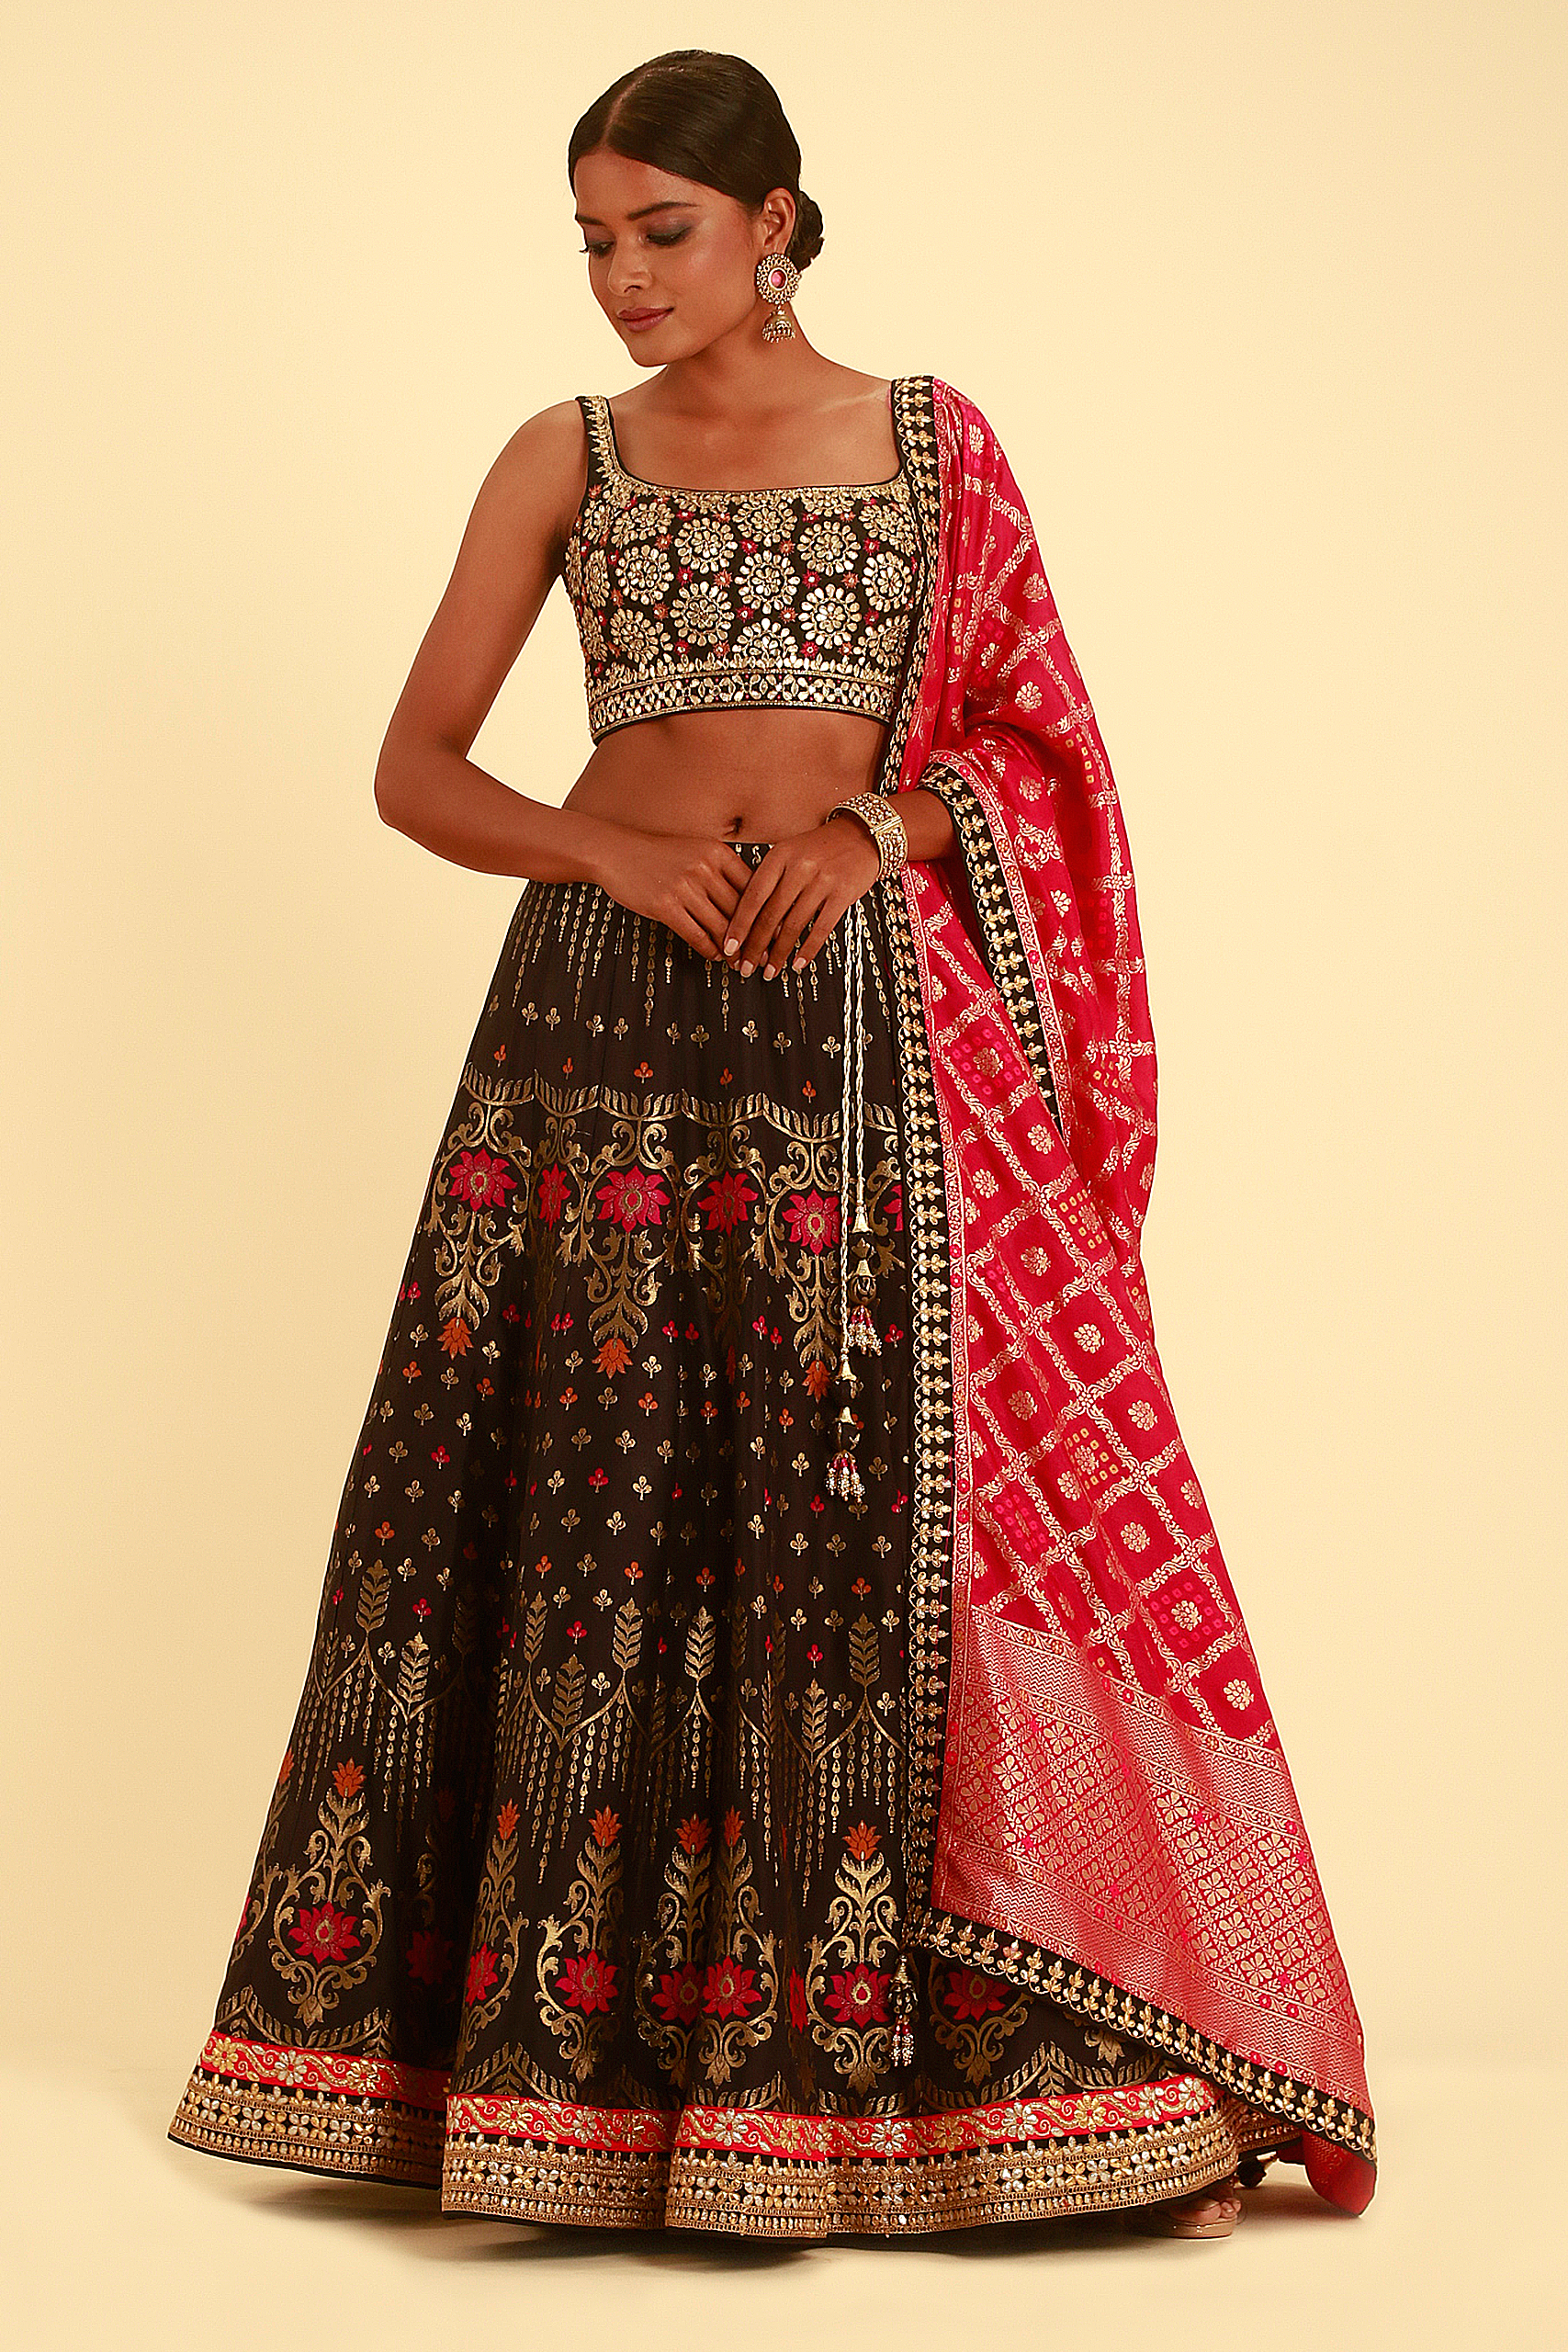 Pink and Black Colored Beautiful Embroidered Net Lehenga Saree | Shop Now